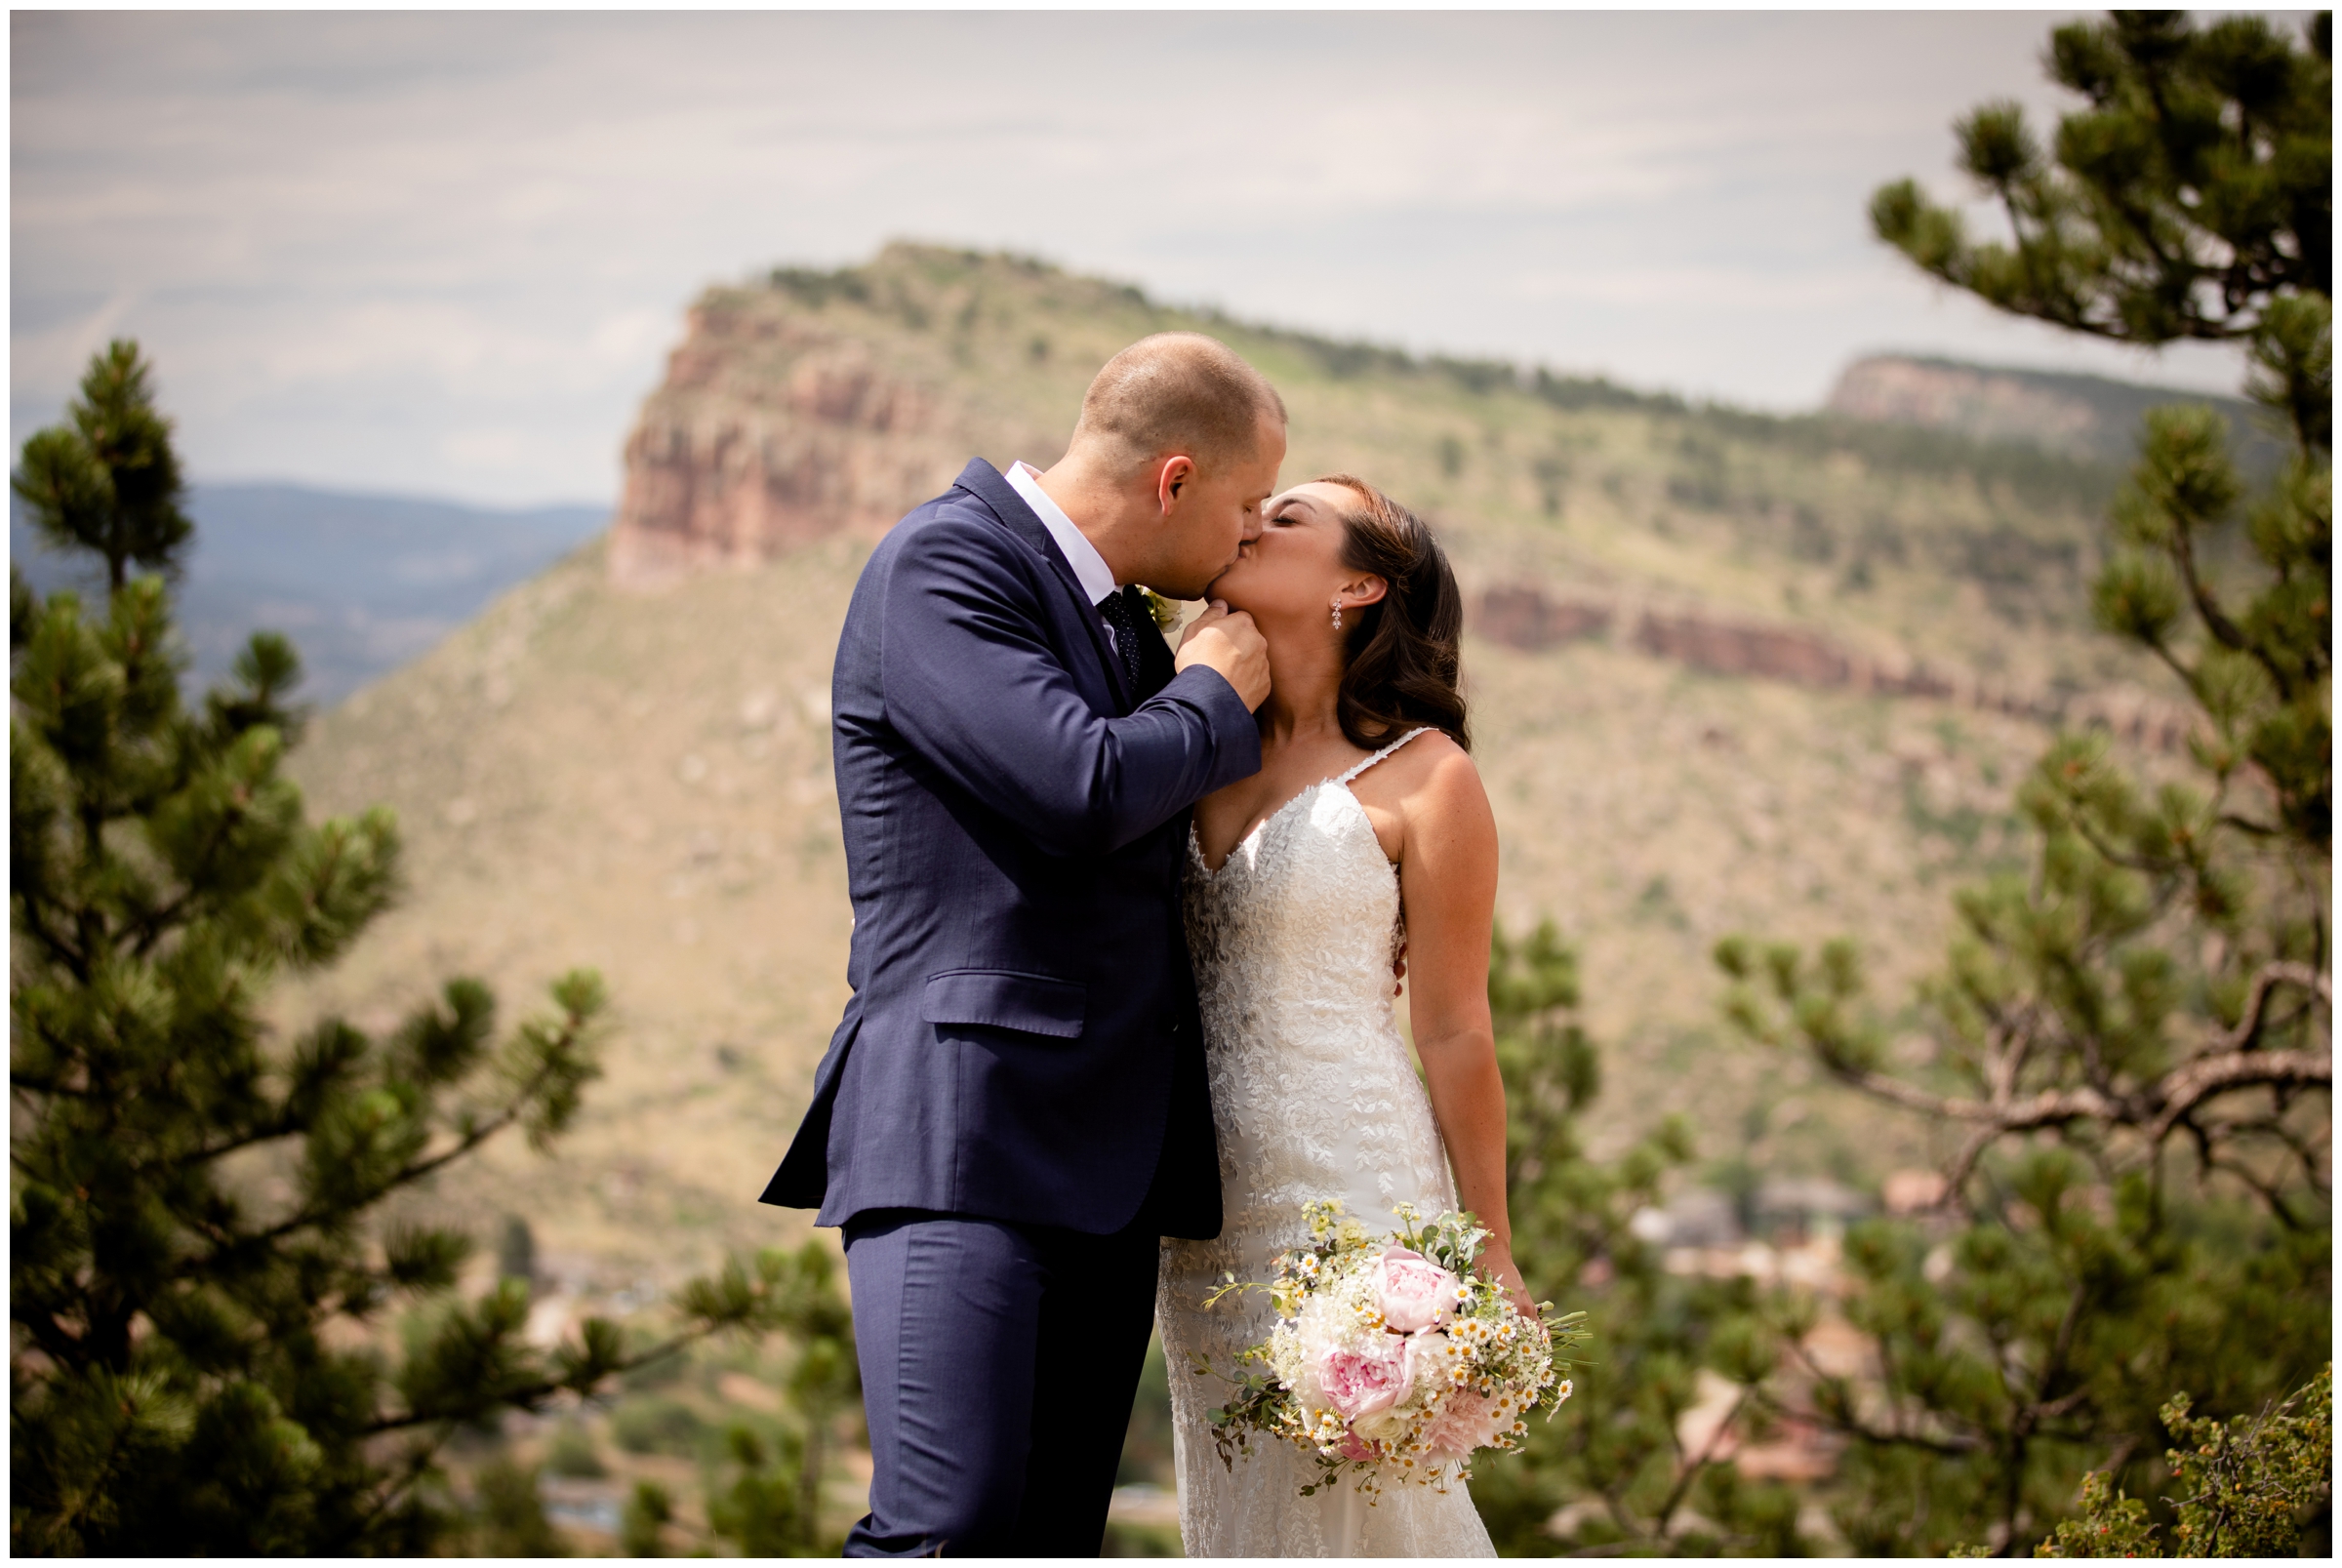 Couple kissing with mountains in background at Lionscrest manor wedding 